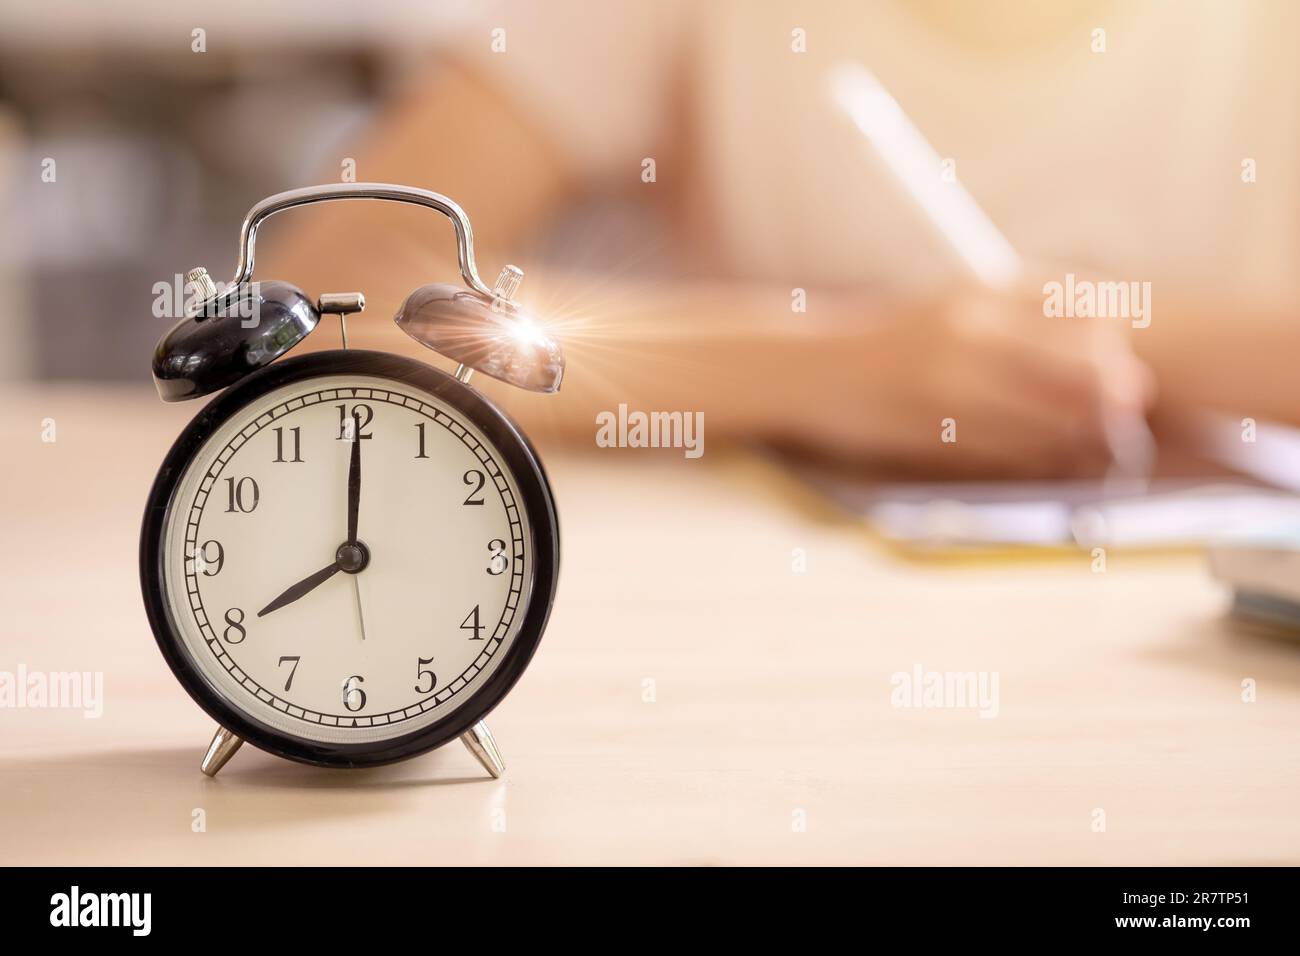 Education alarm times clock School student learning study writing at the morning blur background. Stock Photo